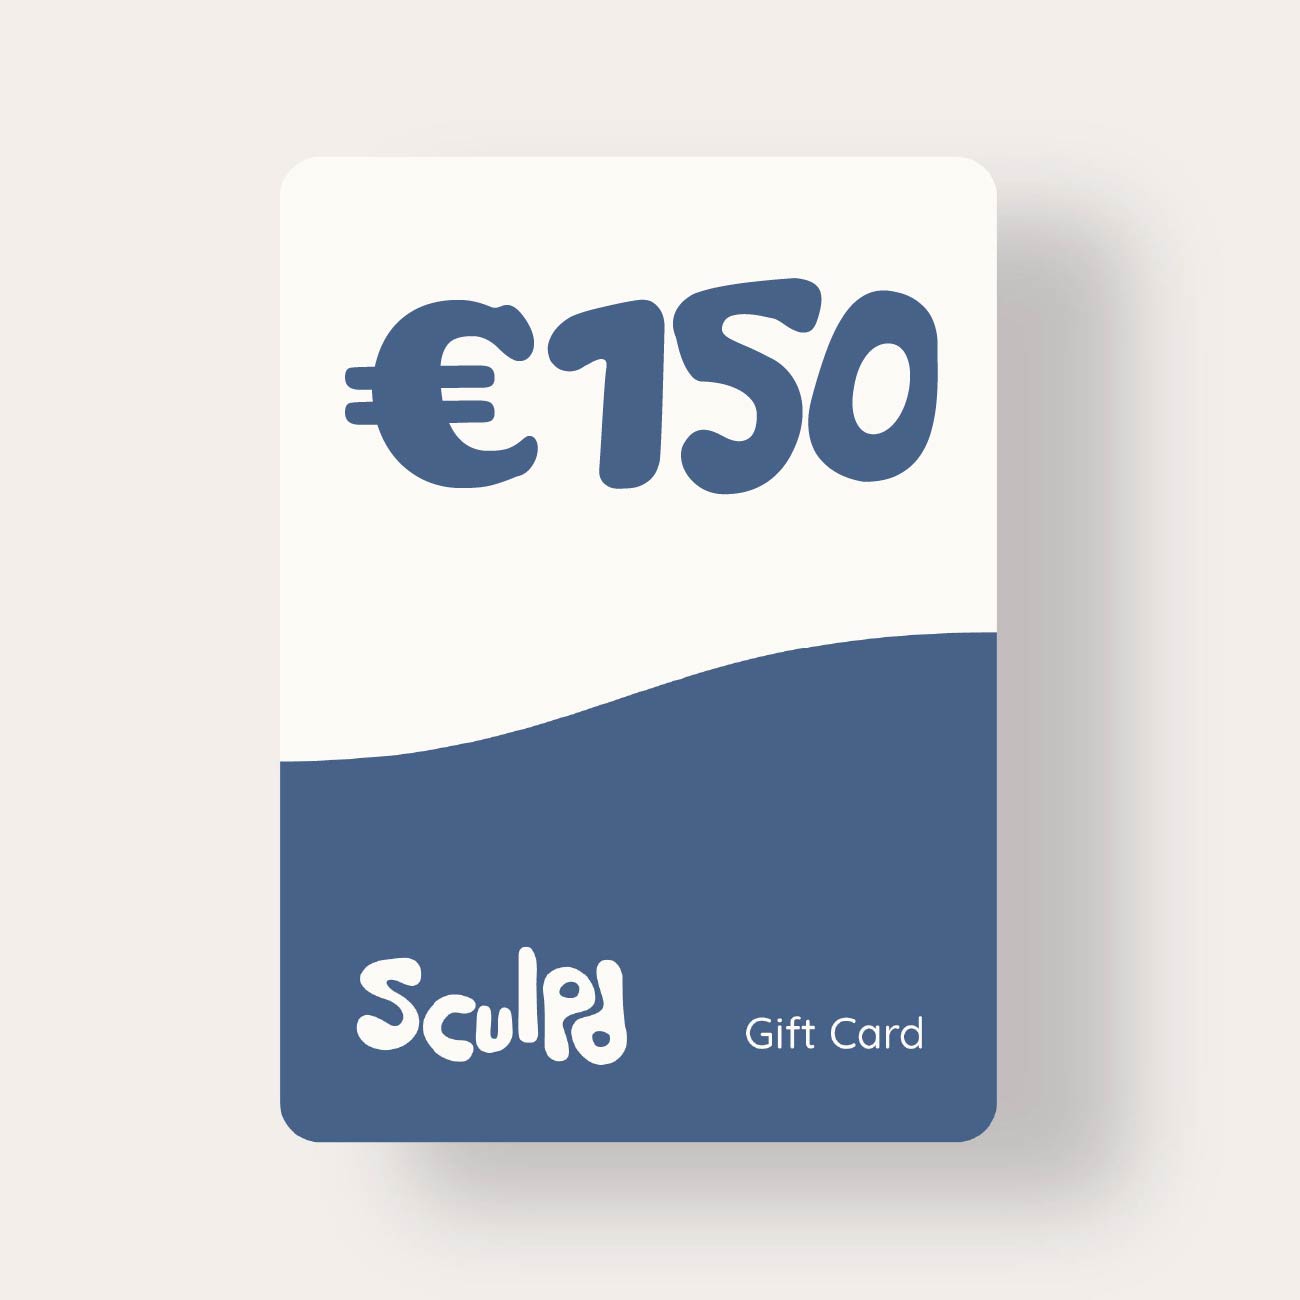 Compare prices for Sculpd across all European  stores